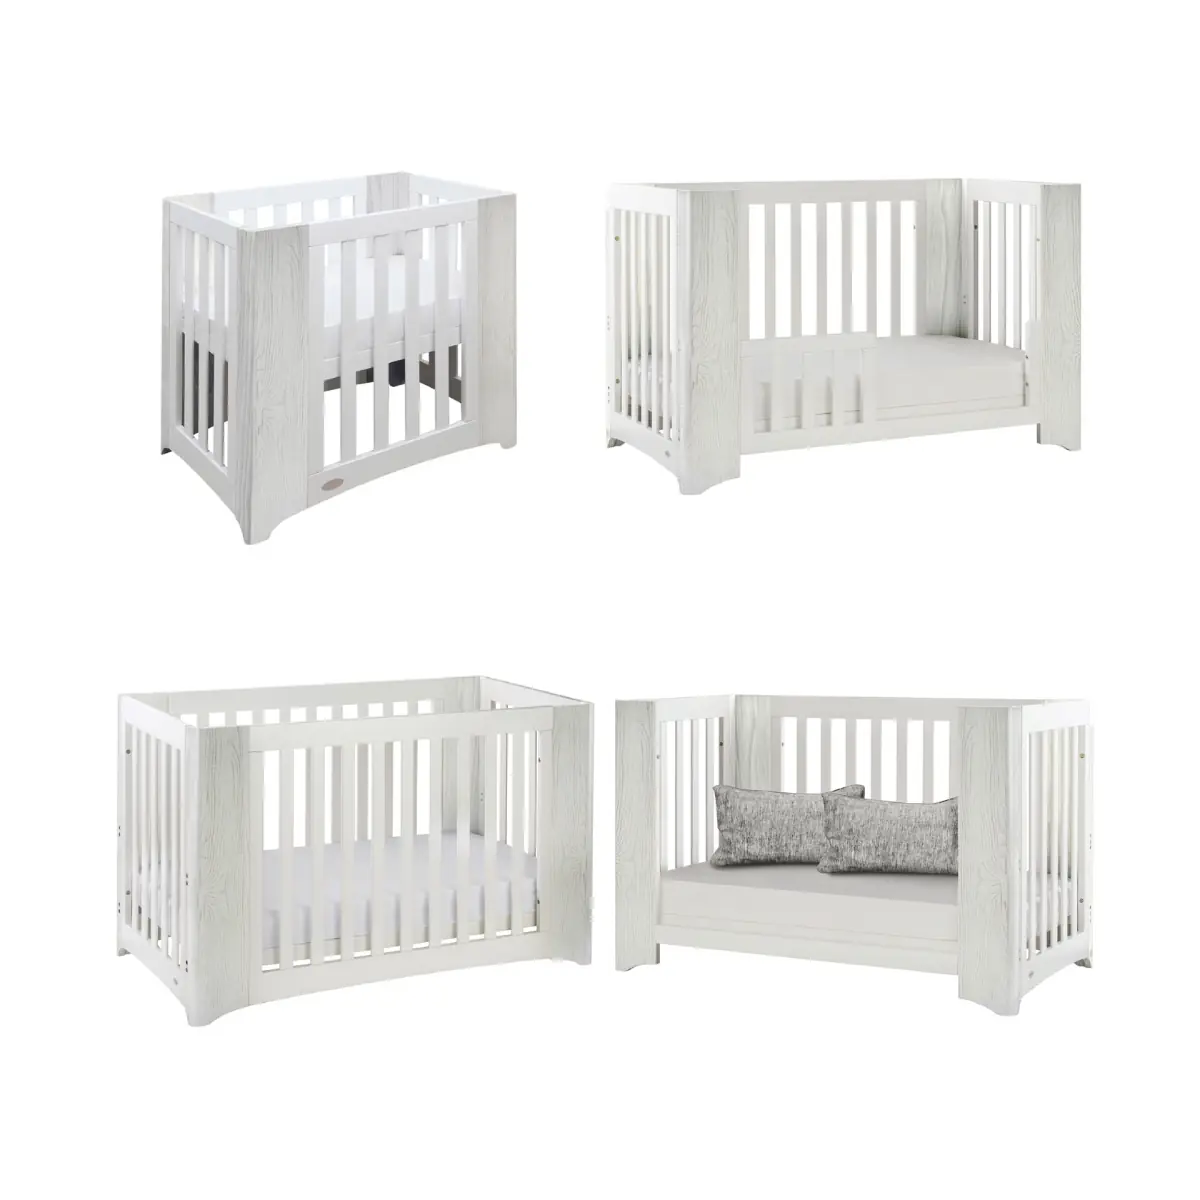 Image of Cocoon Evoluer 4in1 Nursery Furniture System-Grey